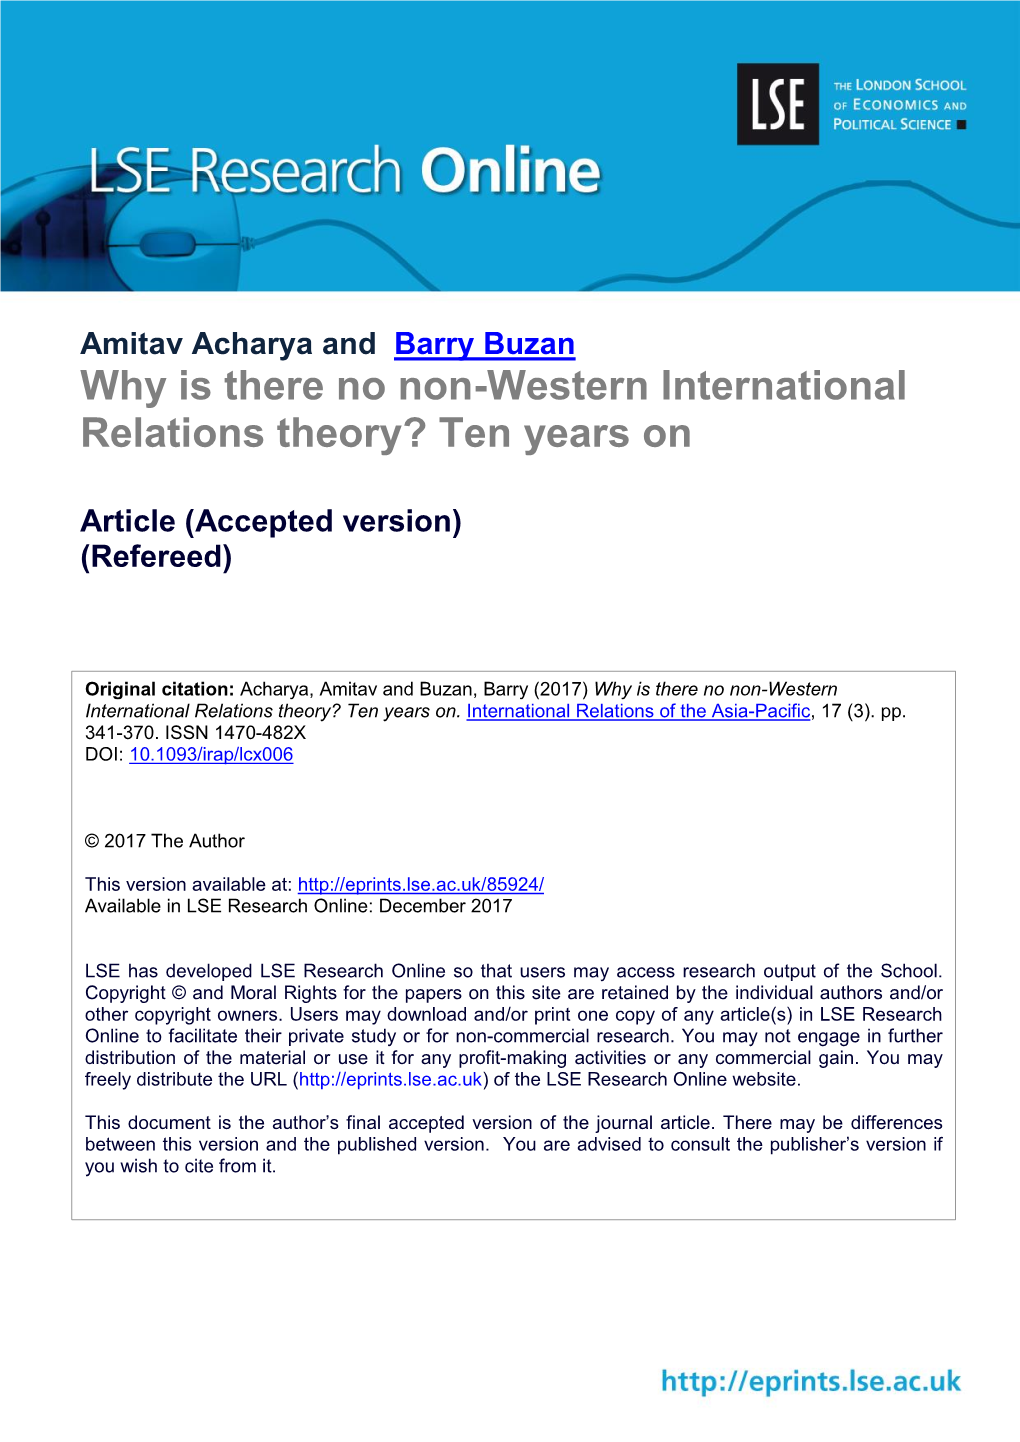 Why Is There No Non-Western International Relations Theory? Ten Years On